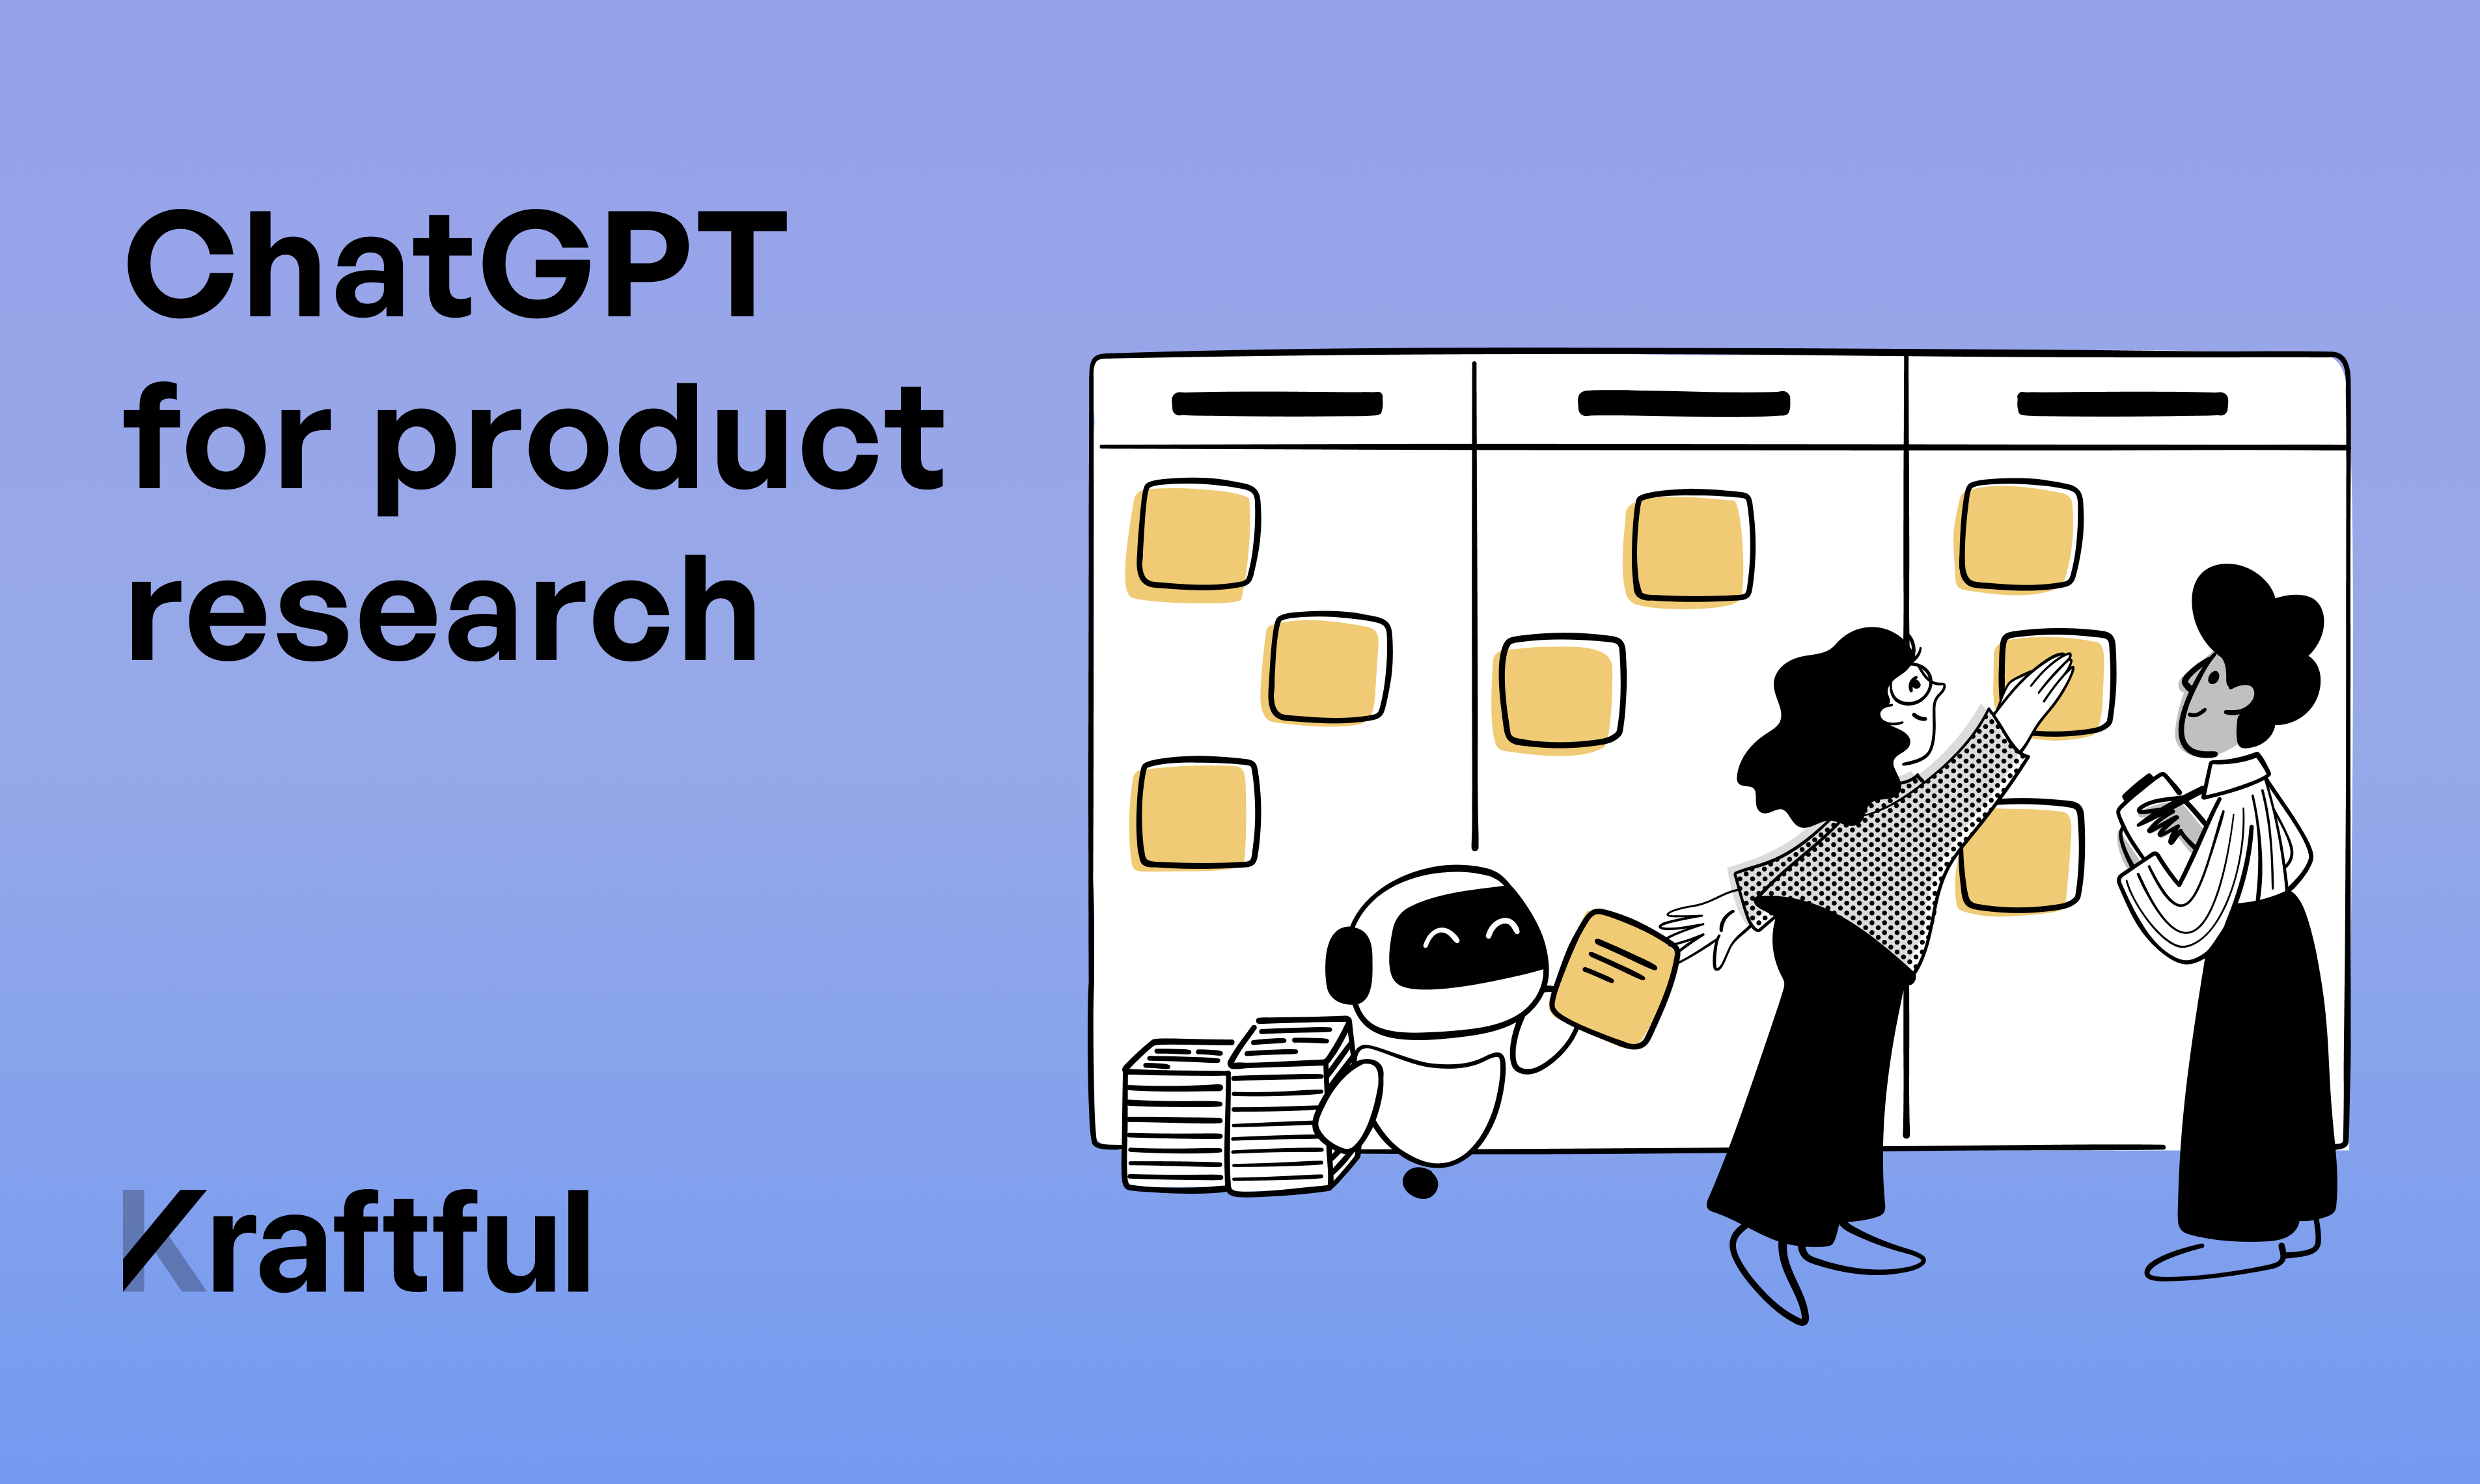 Kraftful - ChatGPT for product research | Product Hunt